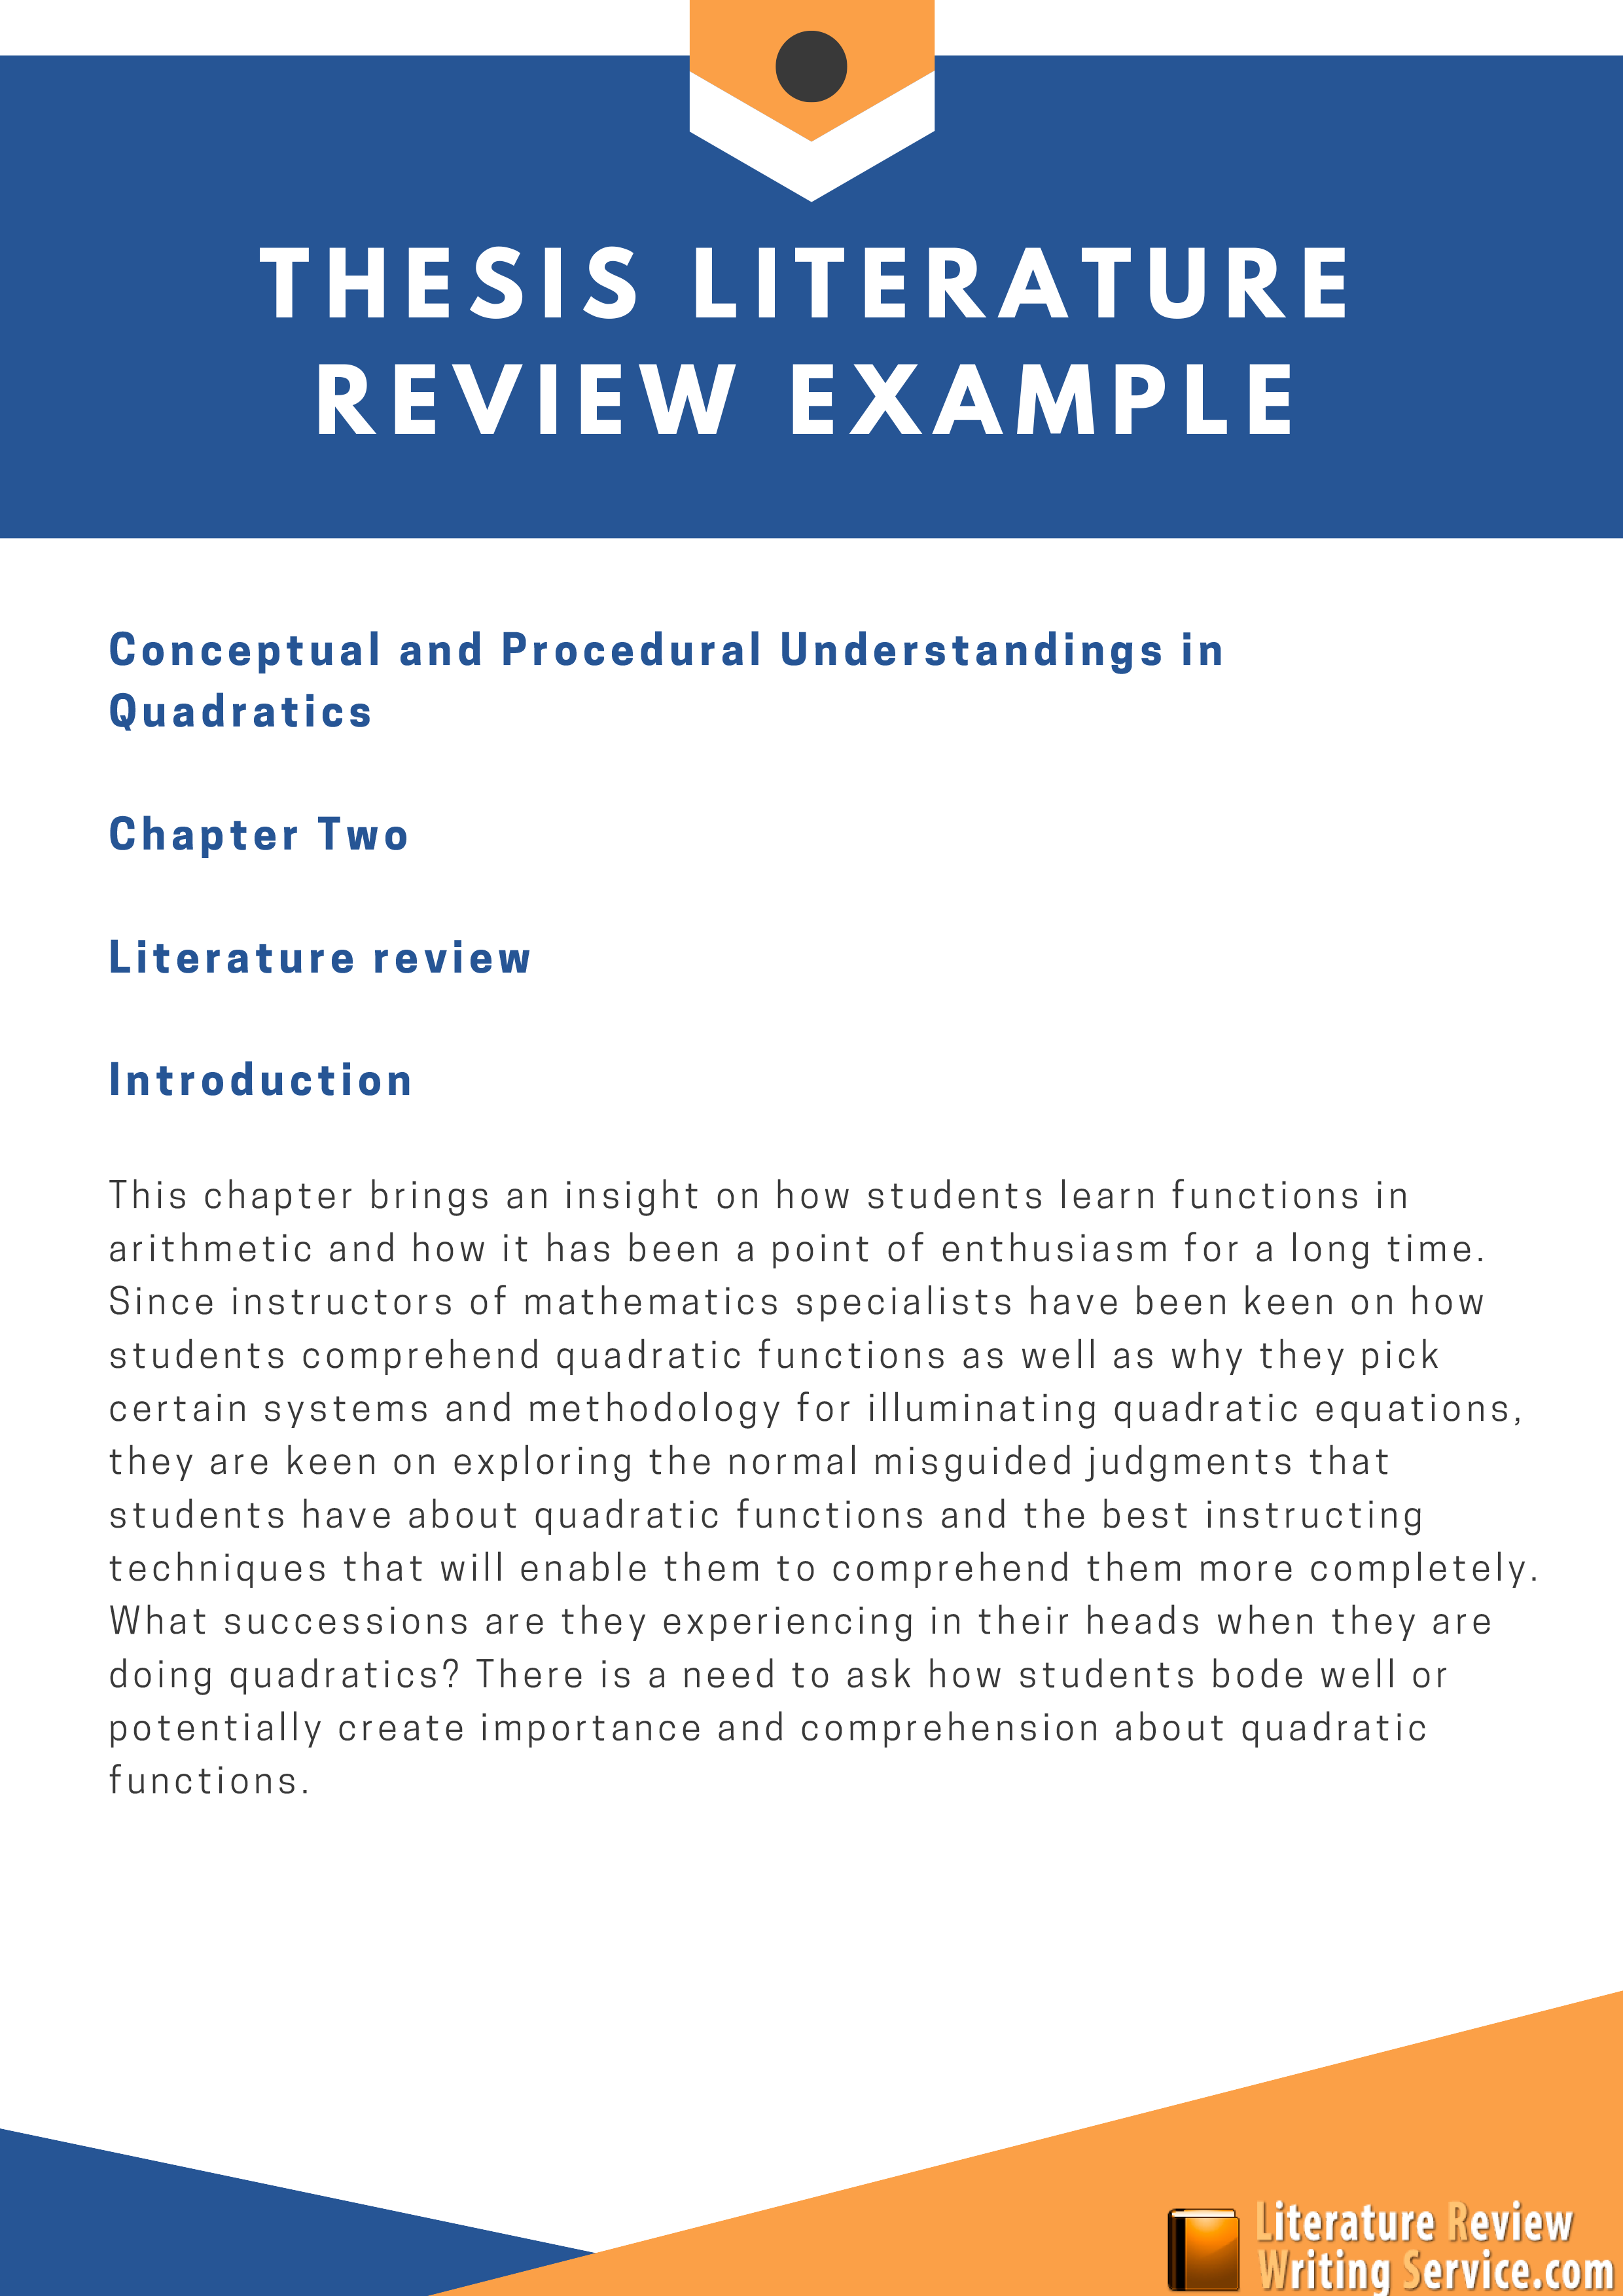 Dissertation proposal service and literature review